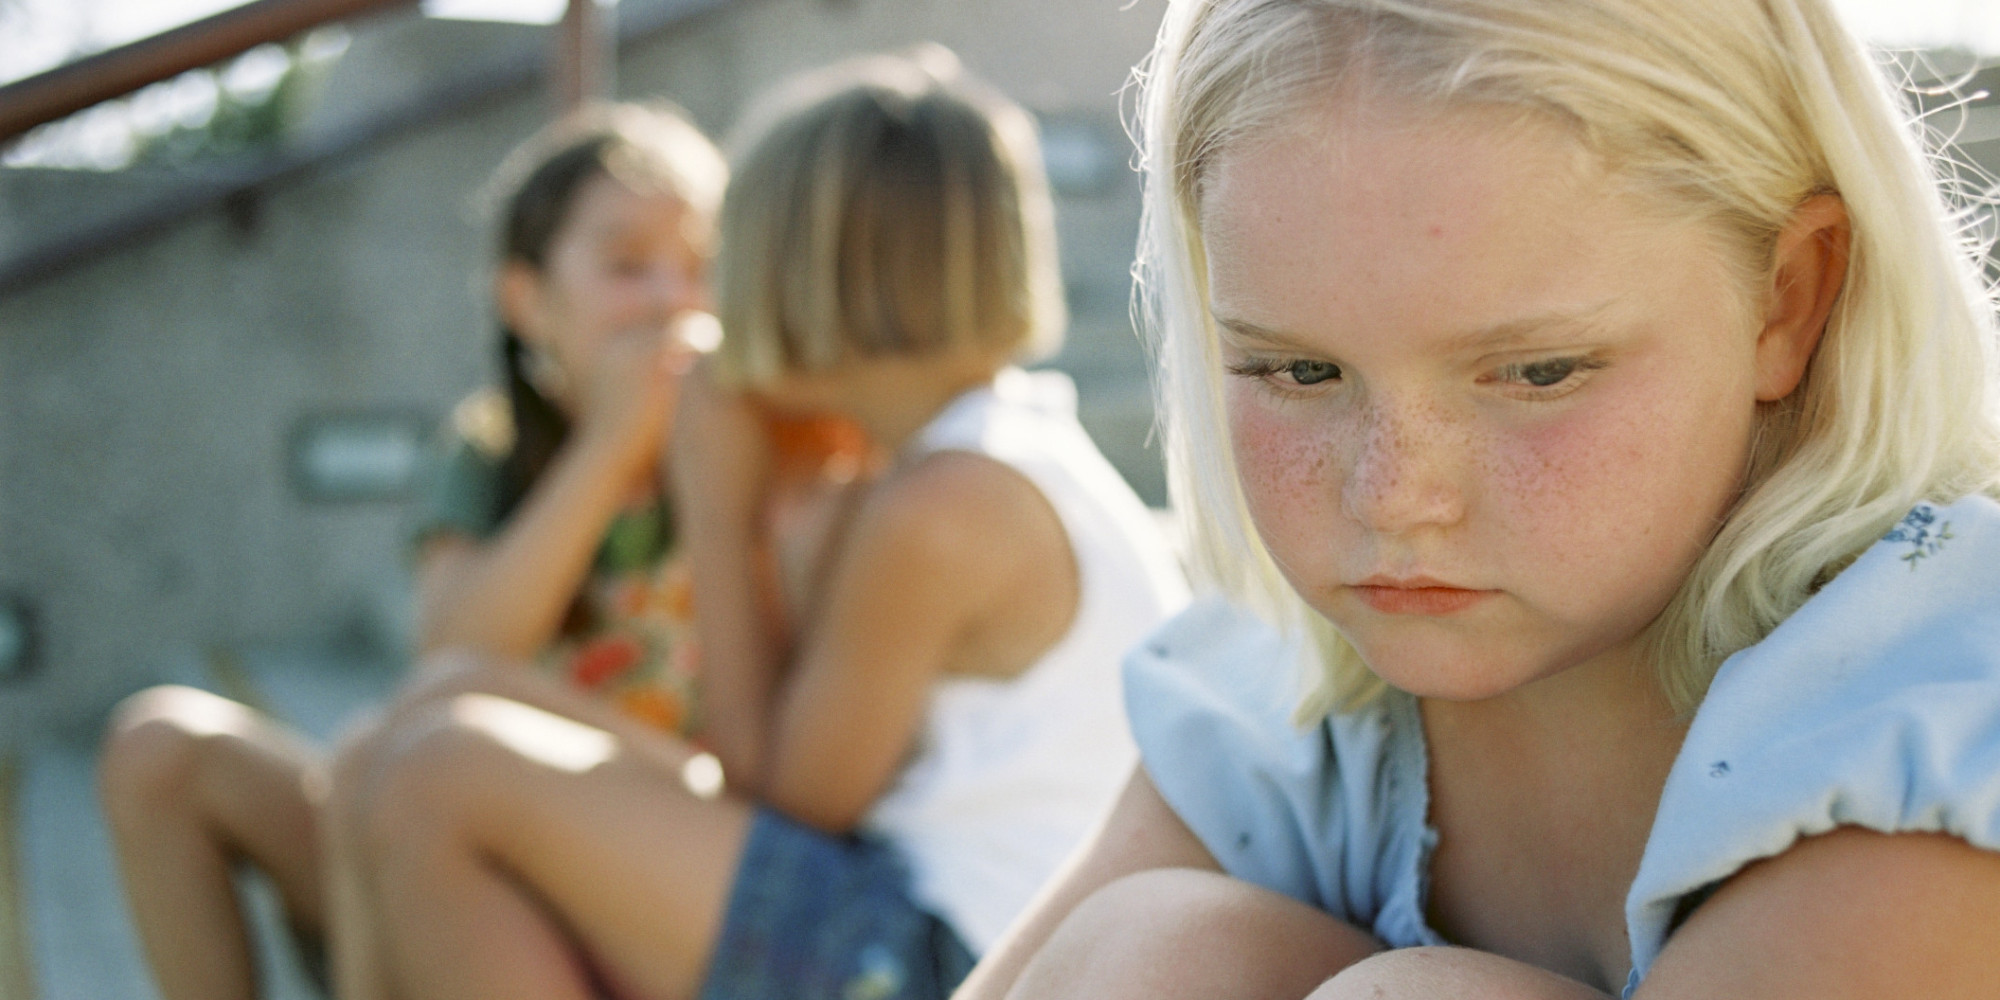 Rude vs. Mean vs. Bullying: Defining the Differences